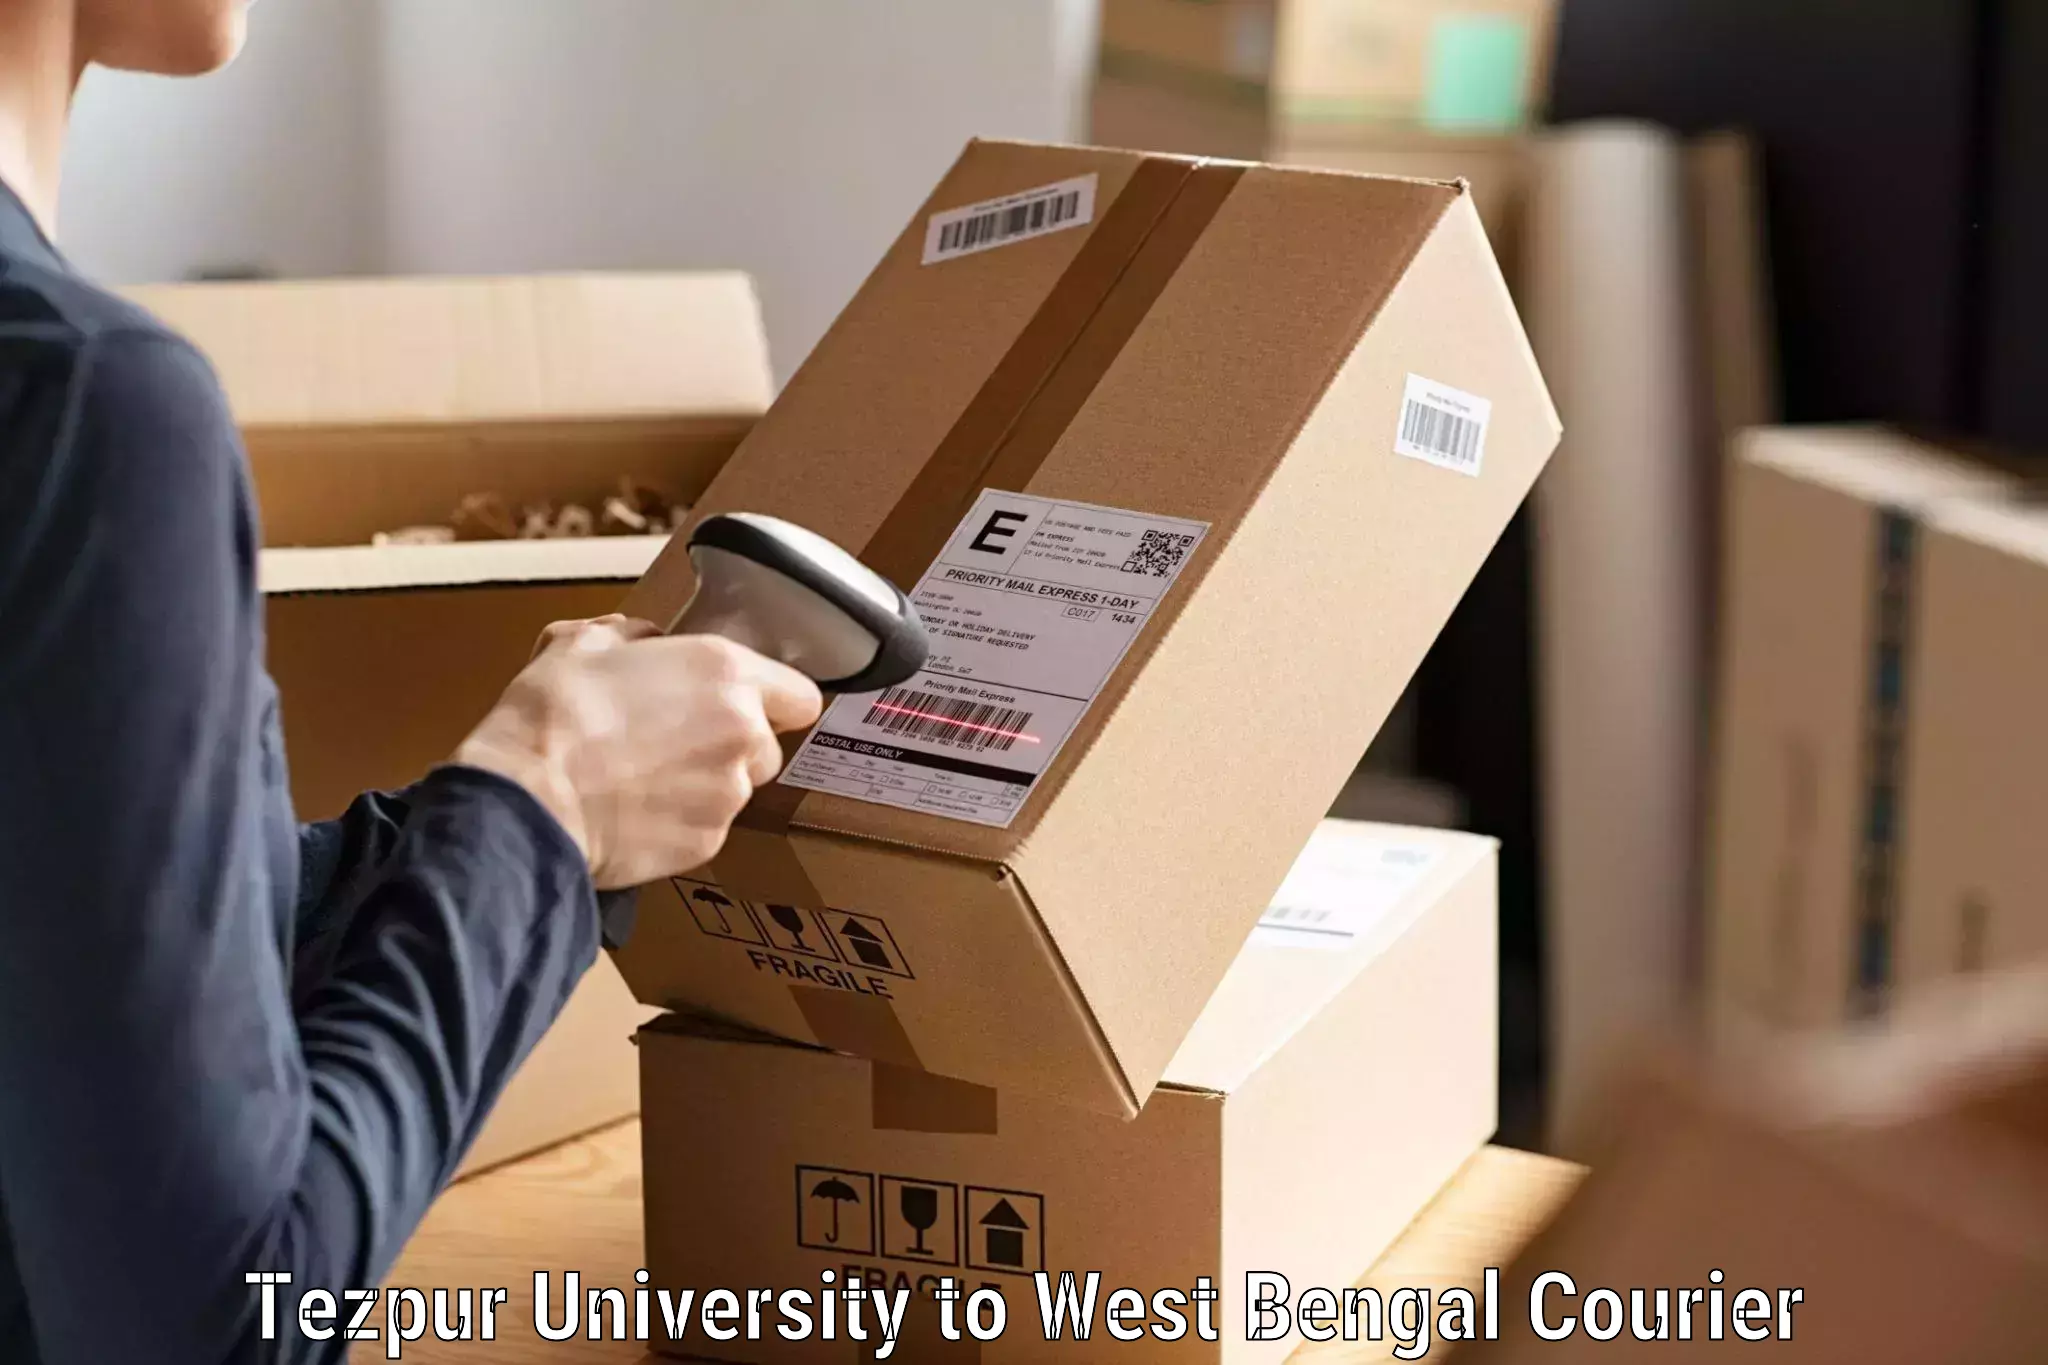 Personal parcel delivery Tezpur University to Manglamaro